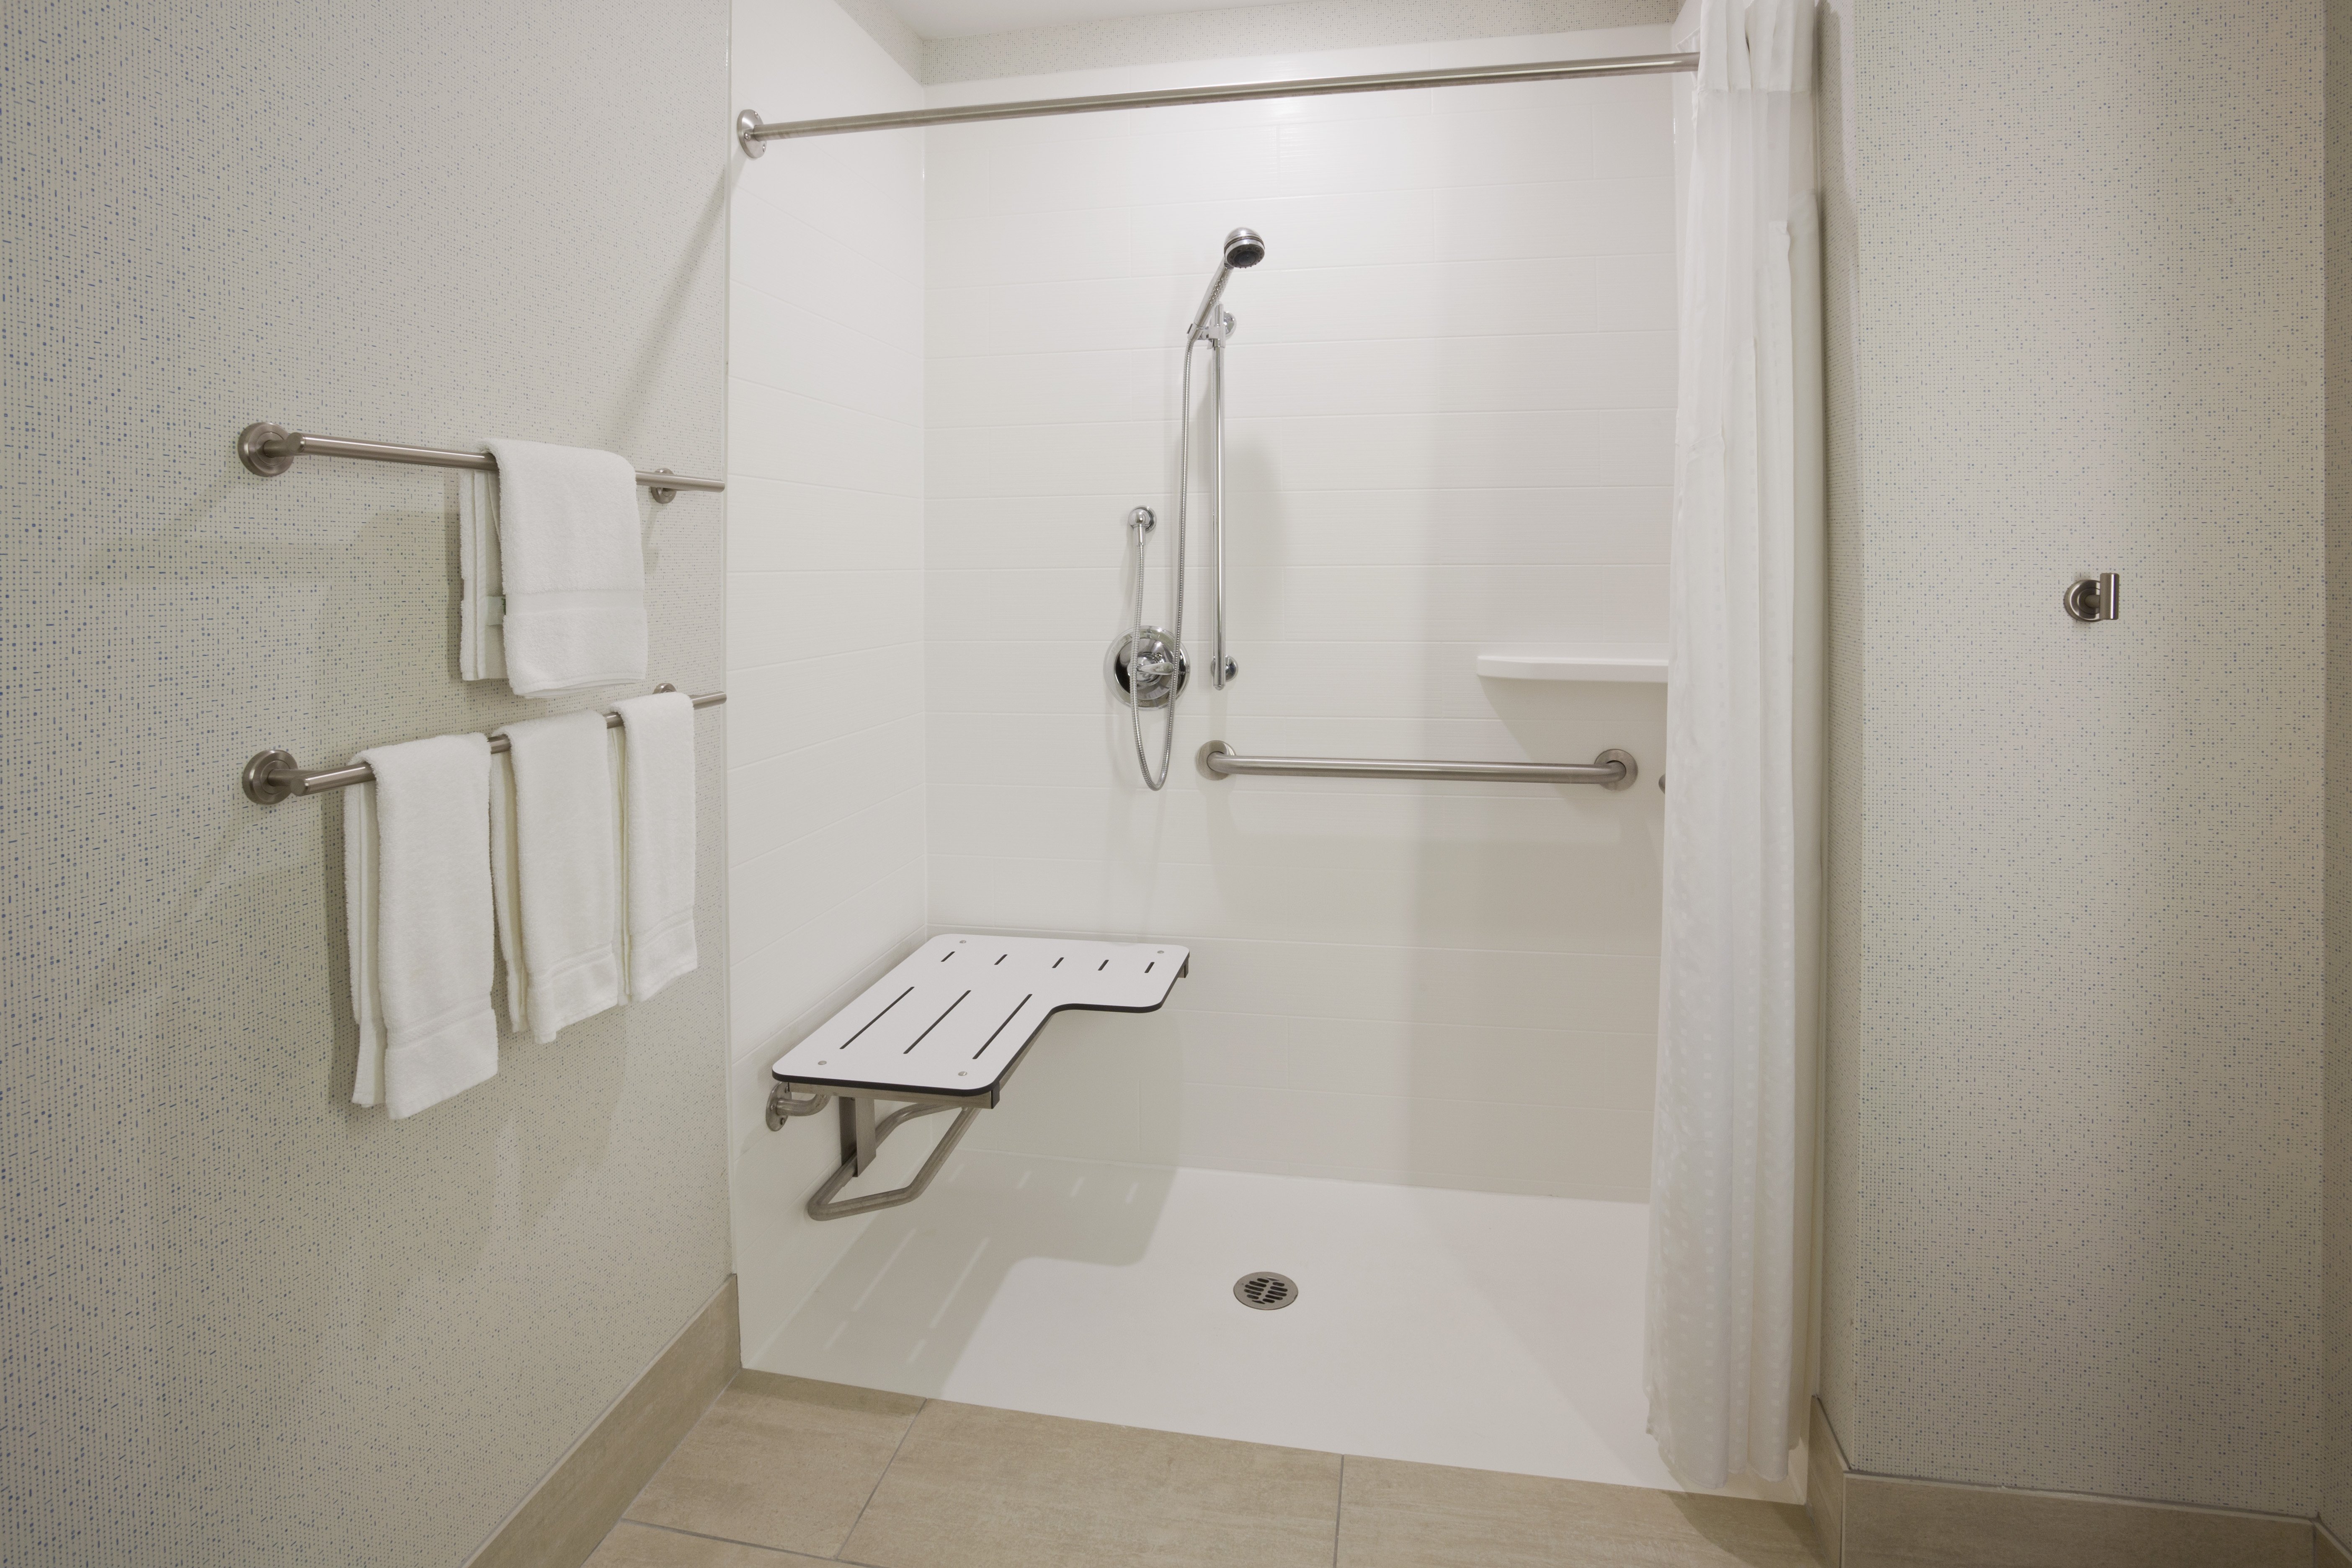 ADA-Accessible Roll-In Shower